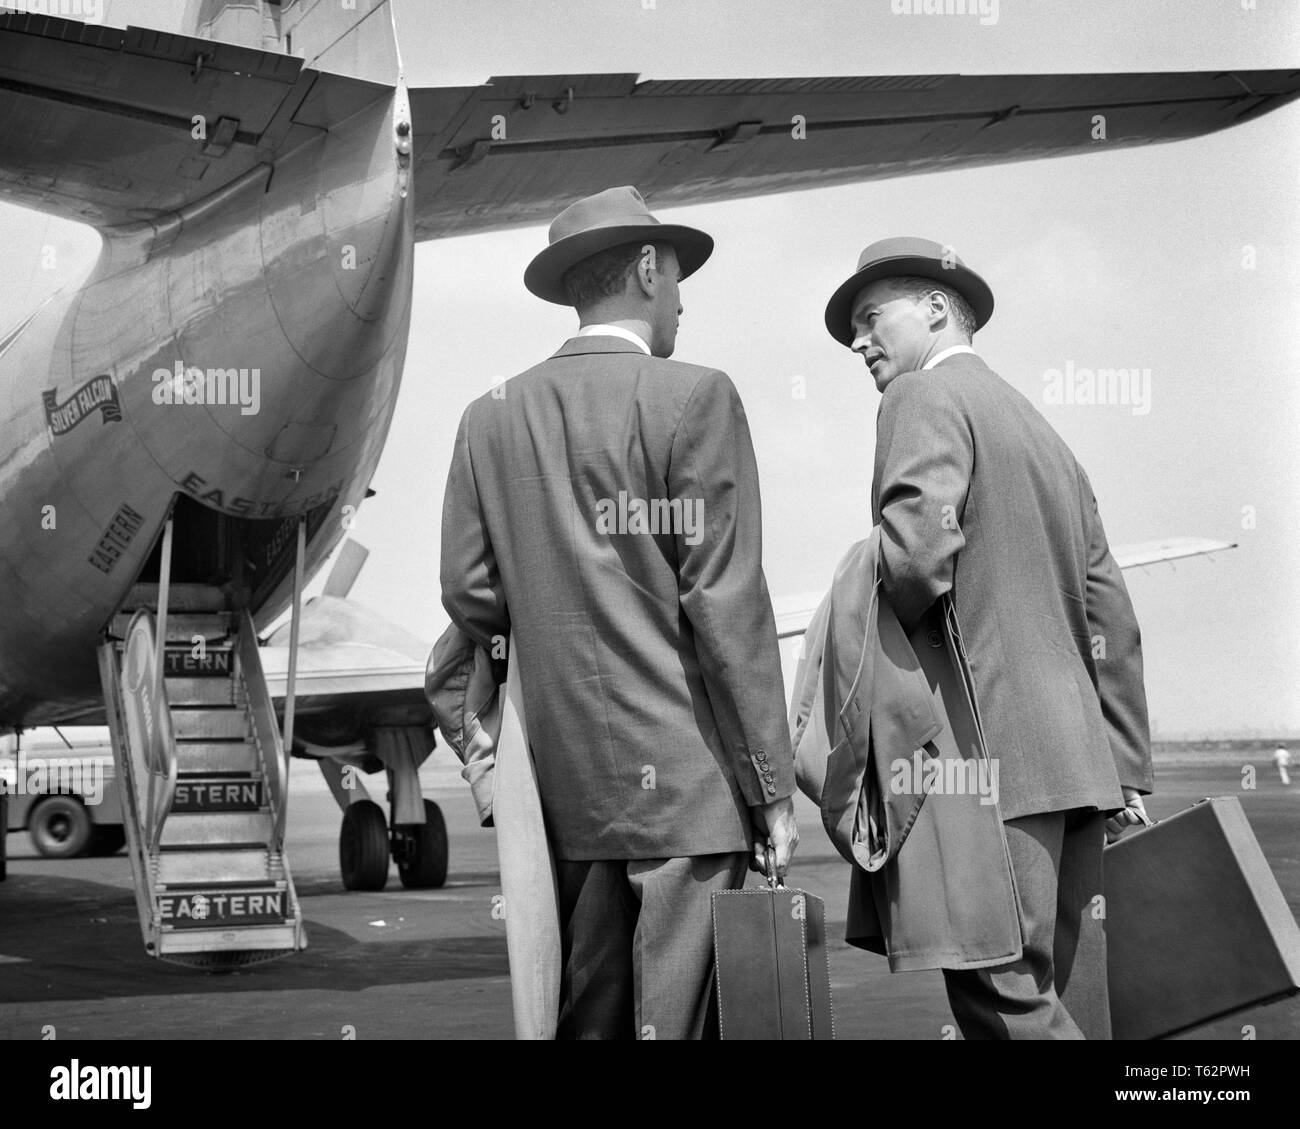 1950s TWO BUSINESSMEN TALKING ON TARMAC ABOUT TO ENTER REAR DOORS OF EASTERN AIRLINES PASSENGER PLANE  - a3124 DEB001 HARS MALES CORPORATE EXECUTIVES TRANSPORTATION B&W SELLING AIRPLANES EASTERN TRIP TARMAC REAR VIEW AIRLINES AVIATION TRAVELING BOSSES DEB001 BACK VIEW COMMERCIAL AVIATION ENTER MANAGERS MID-ADULT MID-ADULT MAN SALESMEN TRAVELER TRAVELERS APPROACHING BLACK AND WHITE CAUCASIAN ETHNICITY OLD FASHIONED Stock Photo